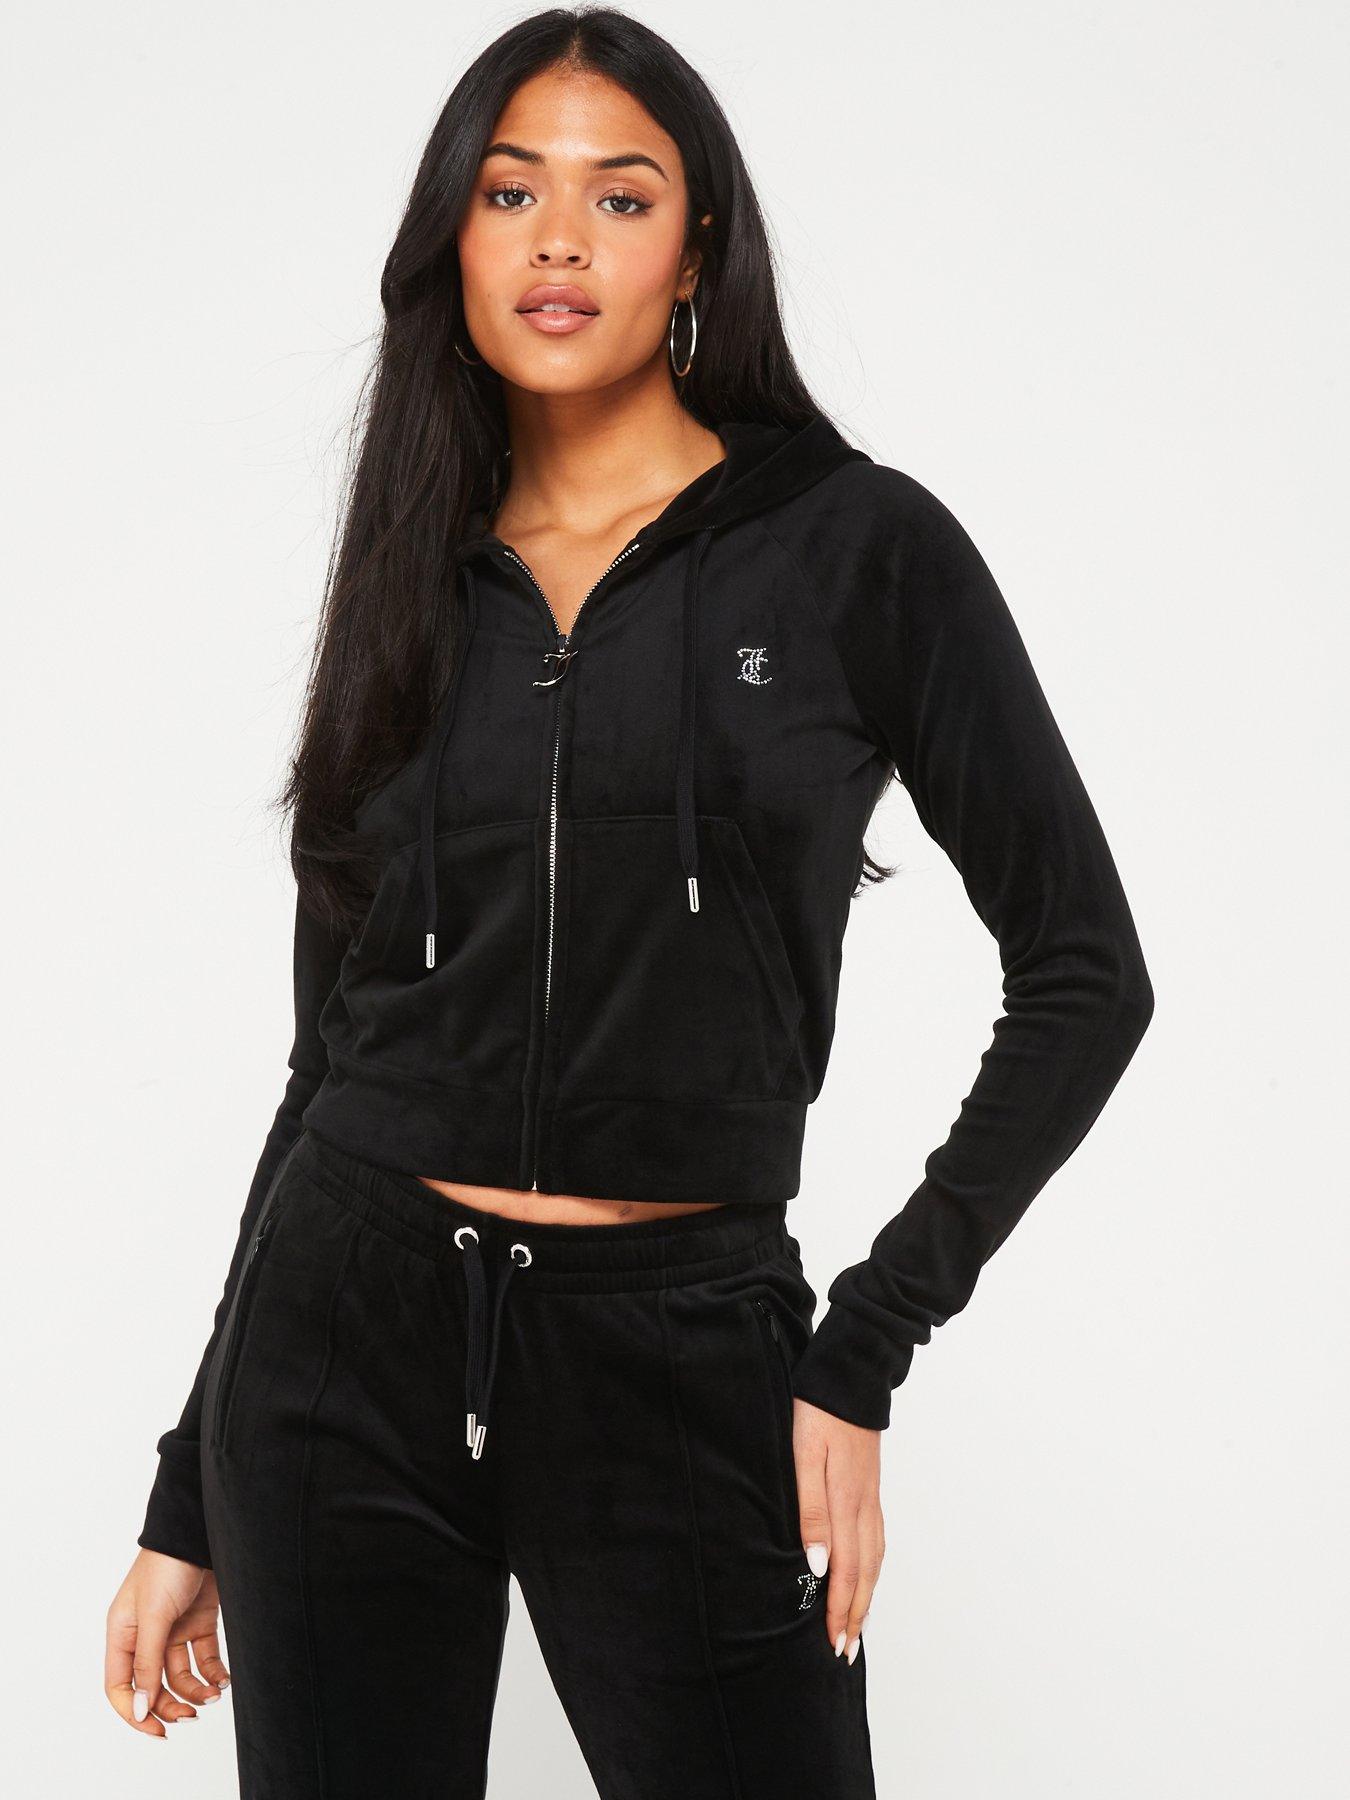 Juicy Couture  Shop Juicy Couture at